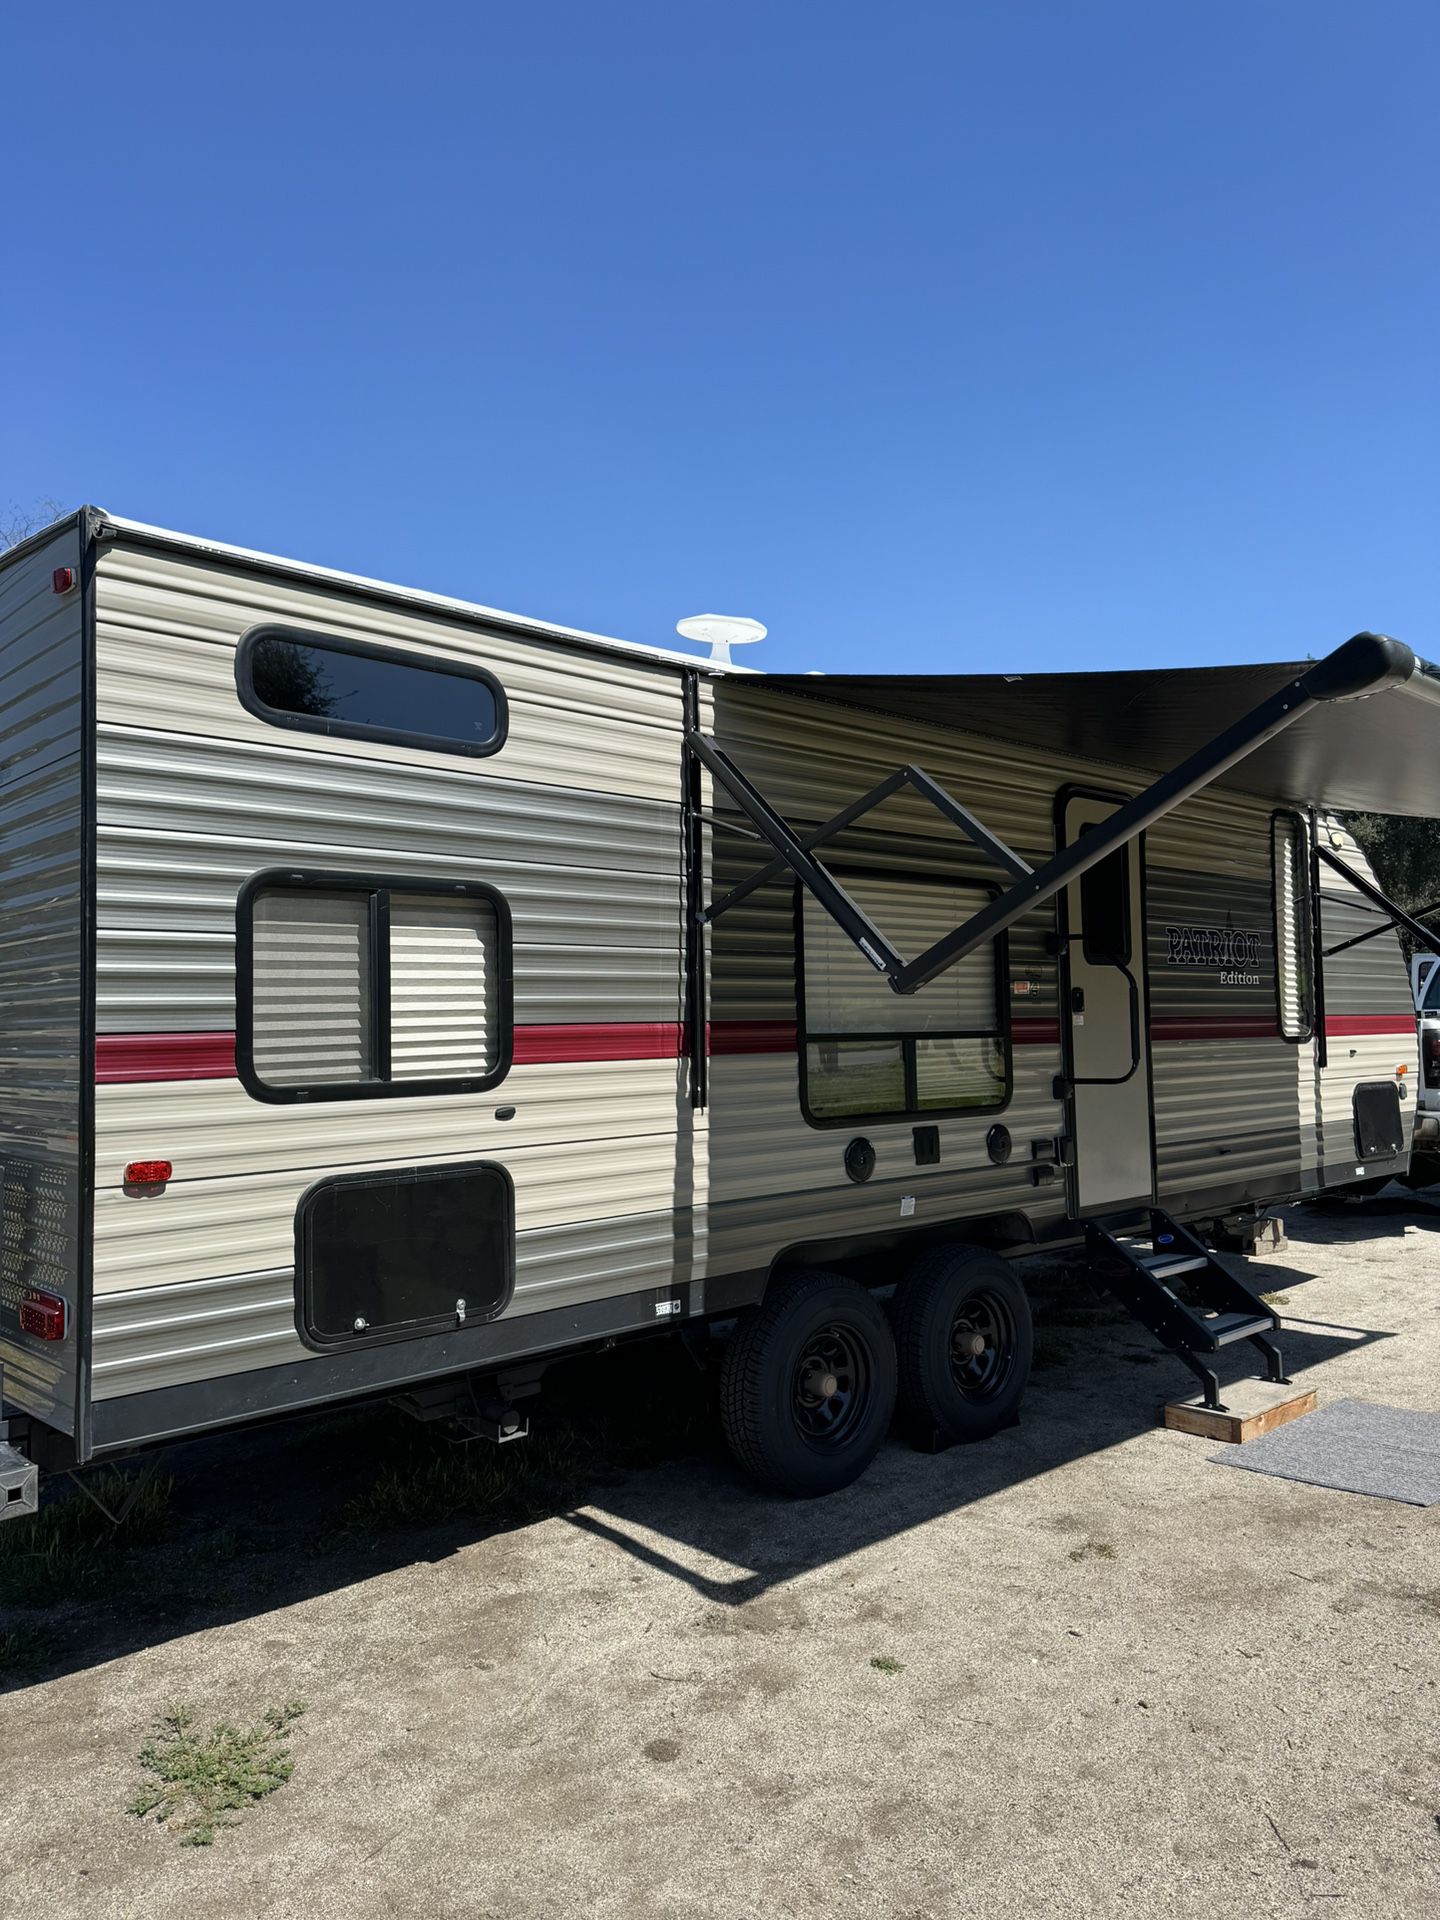 2018 Patriot Edition Travel Trailer For Weekend Camping